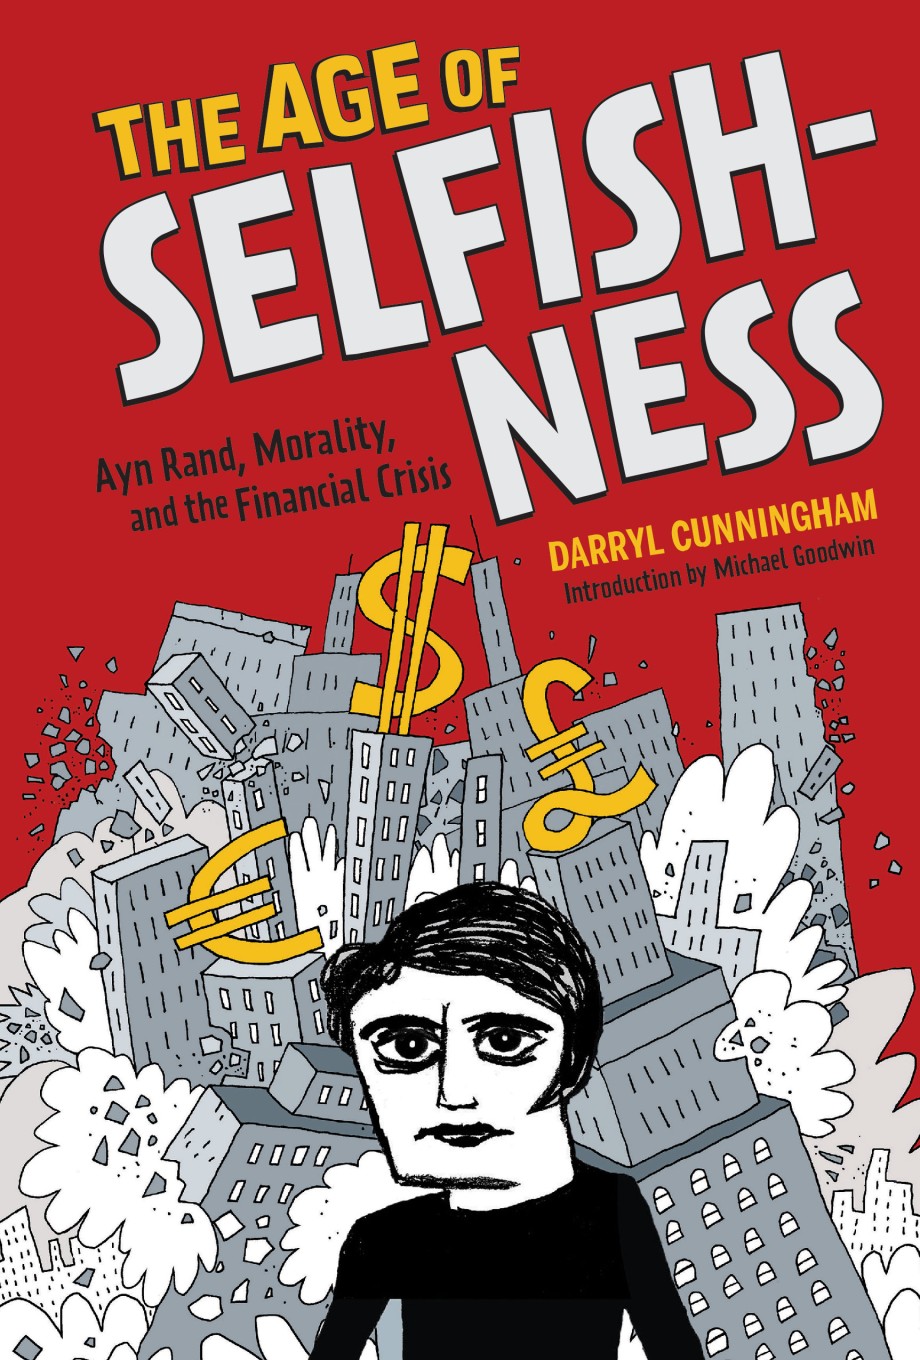 Age of Selfishness Ayn Rand, Morality, and the Financial Crisis